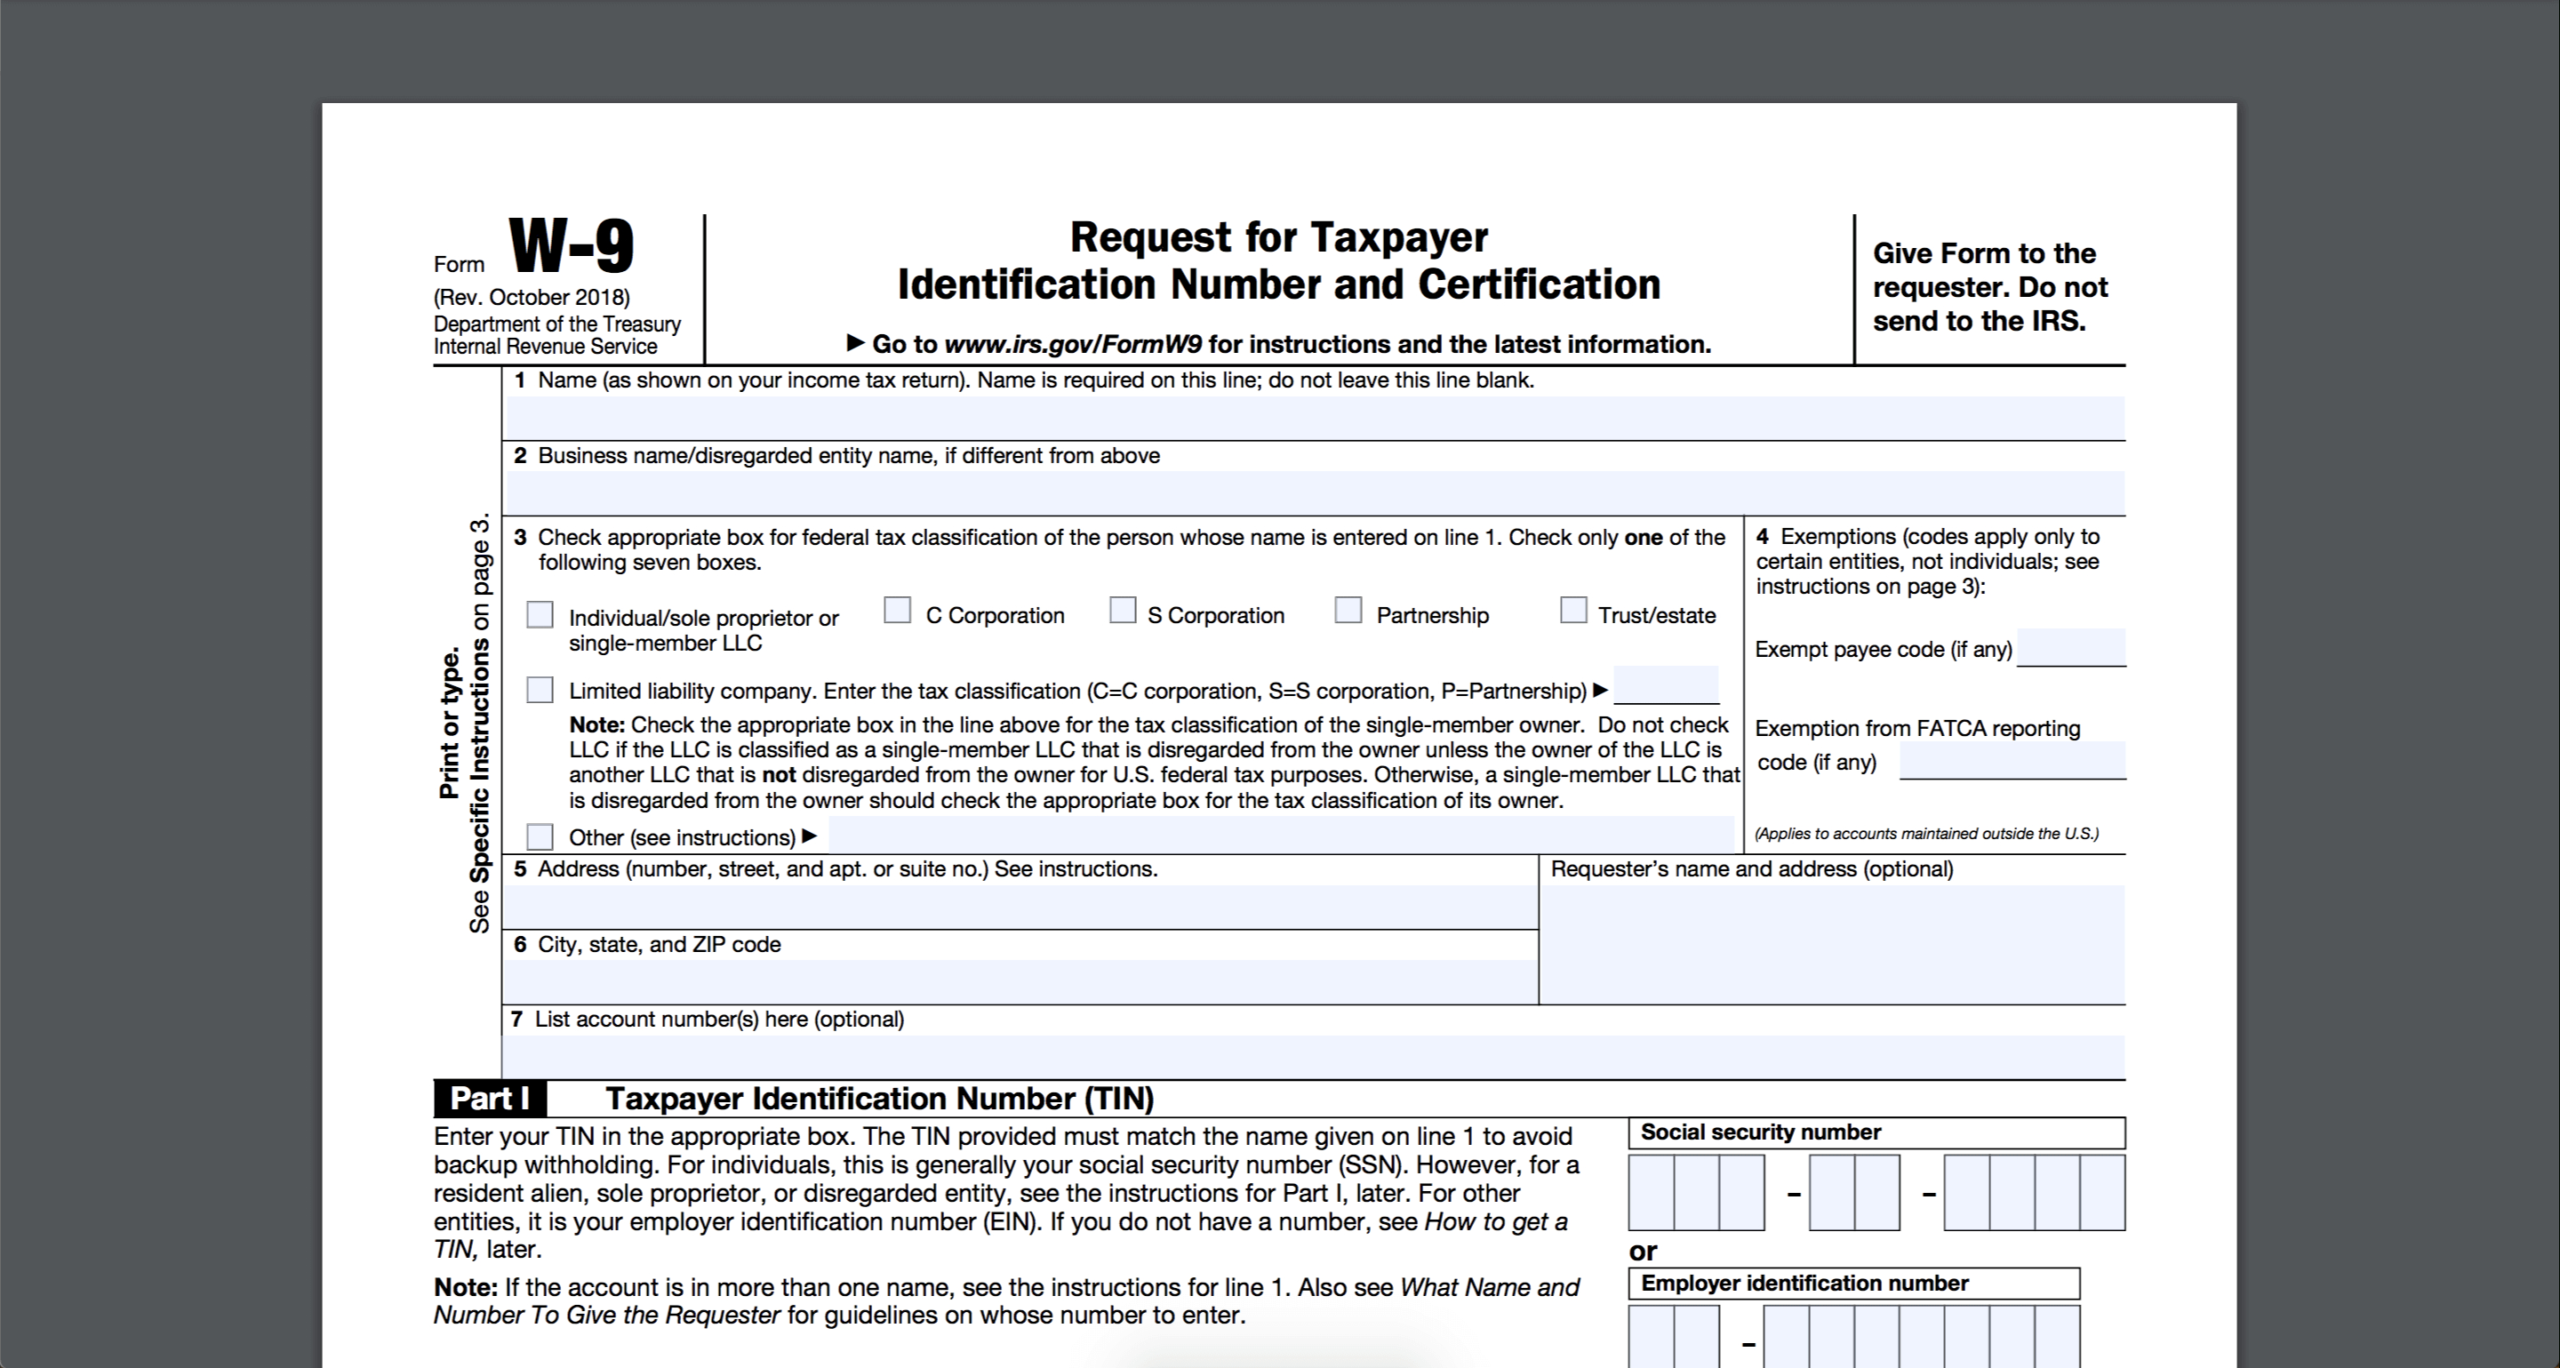 How To Fill Out And Sign Your W-9 Form Online